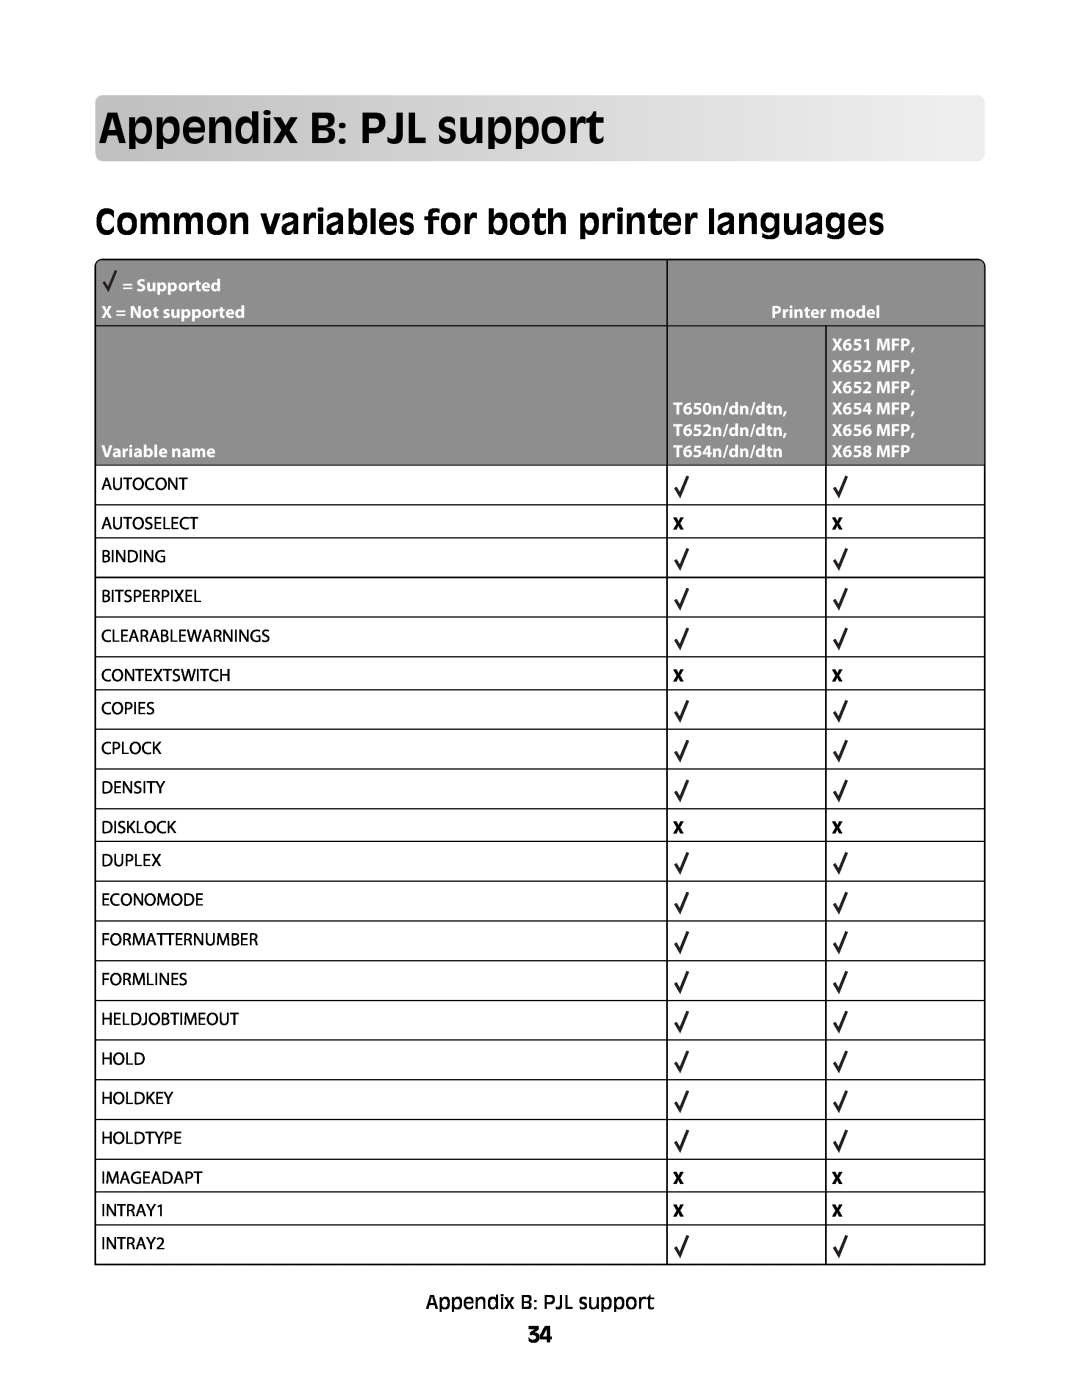 Lexmark X656 MFP, X652 MFP, X654 MFP, X651 MFP, X658 MFP Appendix BPJLsupport, Common variables for both printer languages 